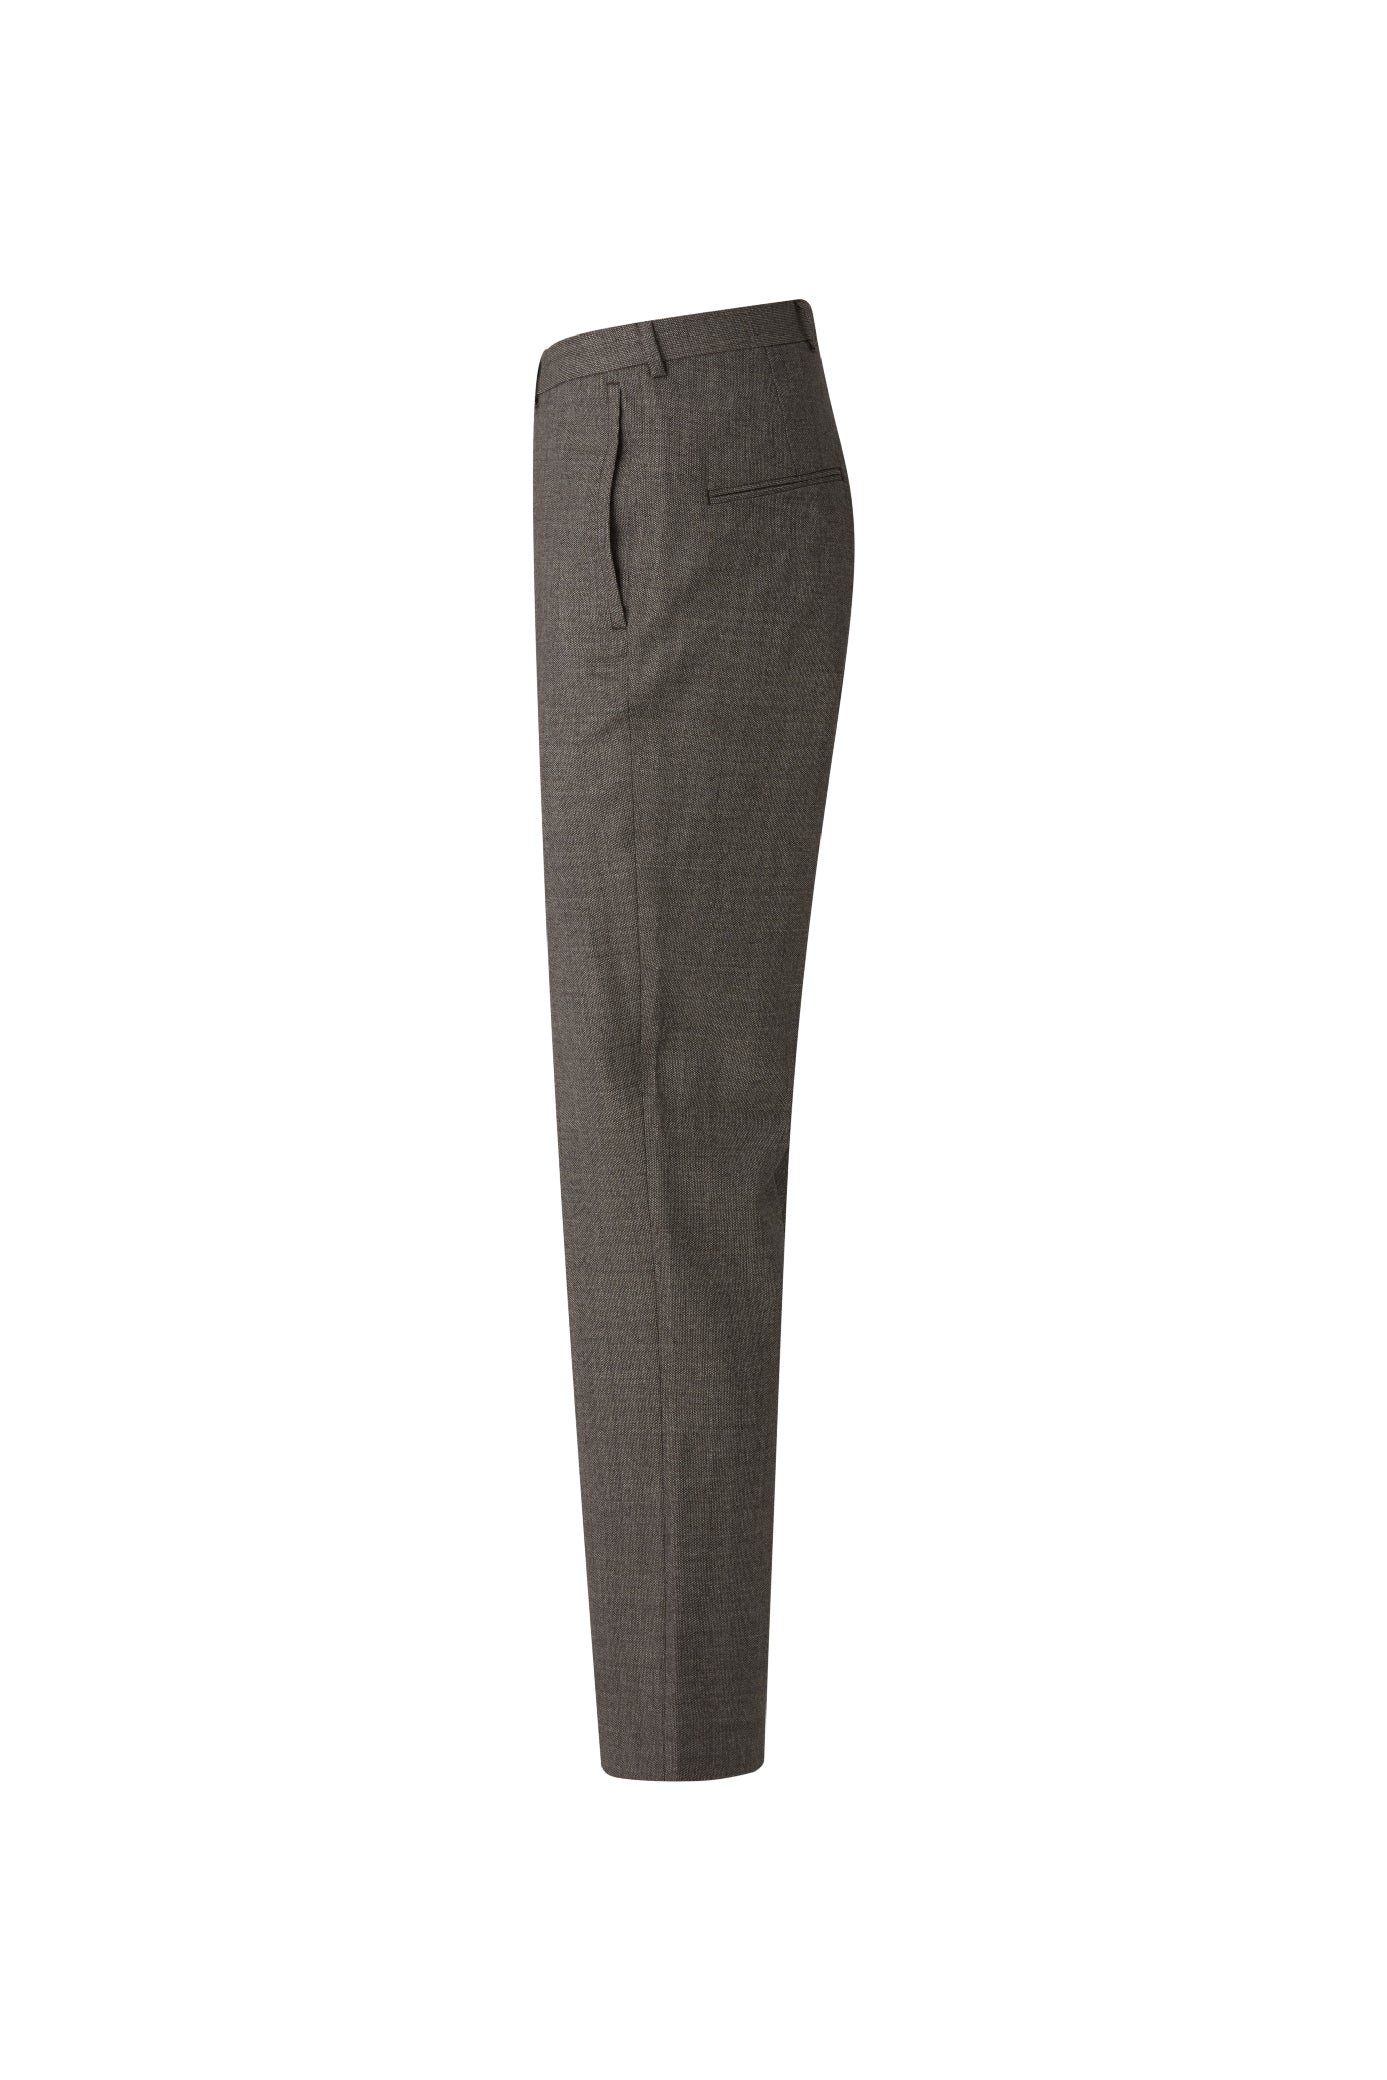 Maine wool structure trouser